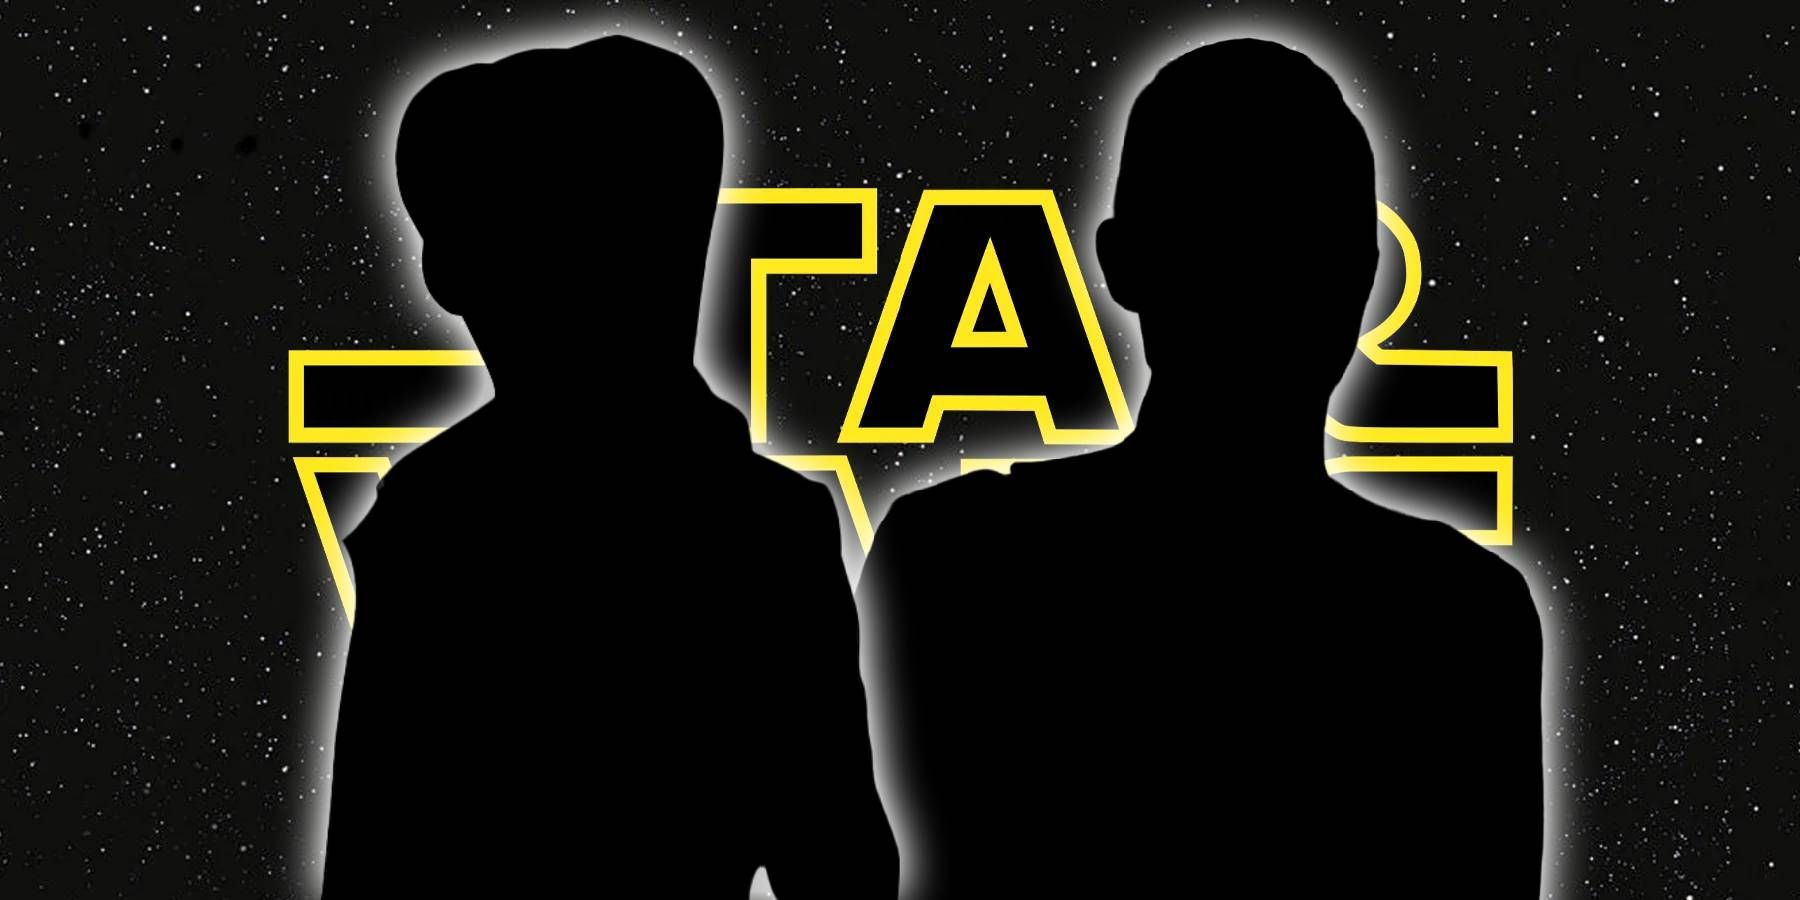 The Star Wars logo overlaid with silhouettes of General Hera Syndulla and Grand Admiral Thrawn